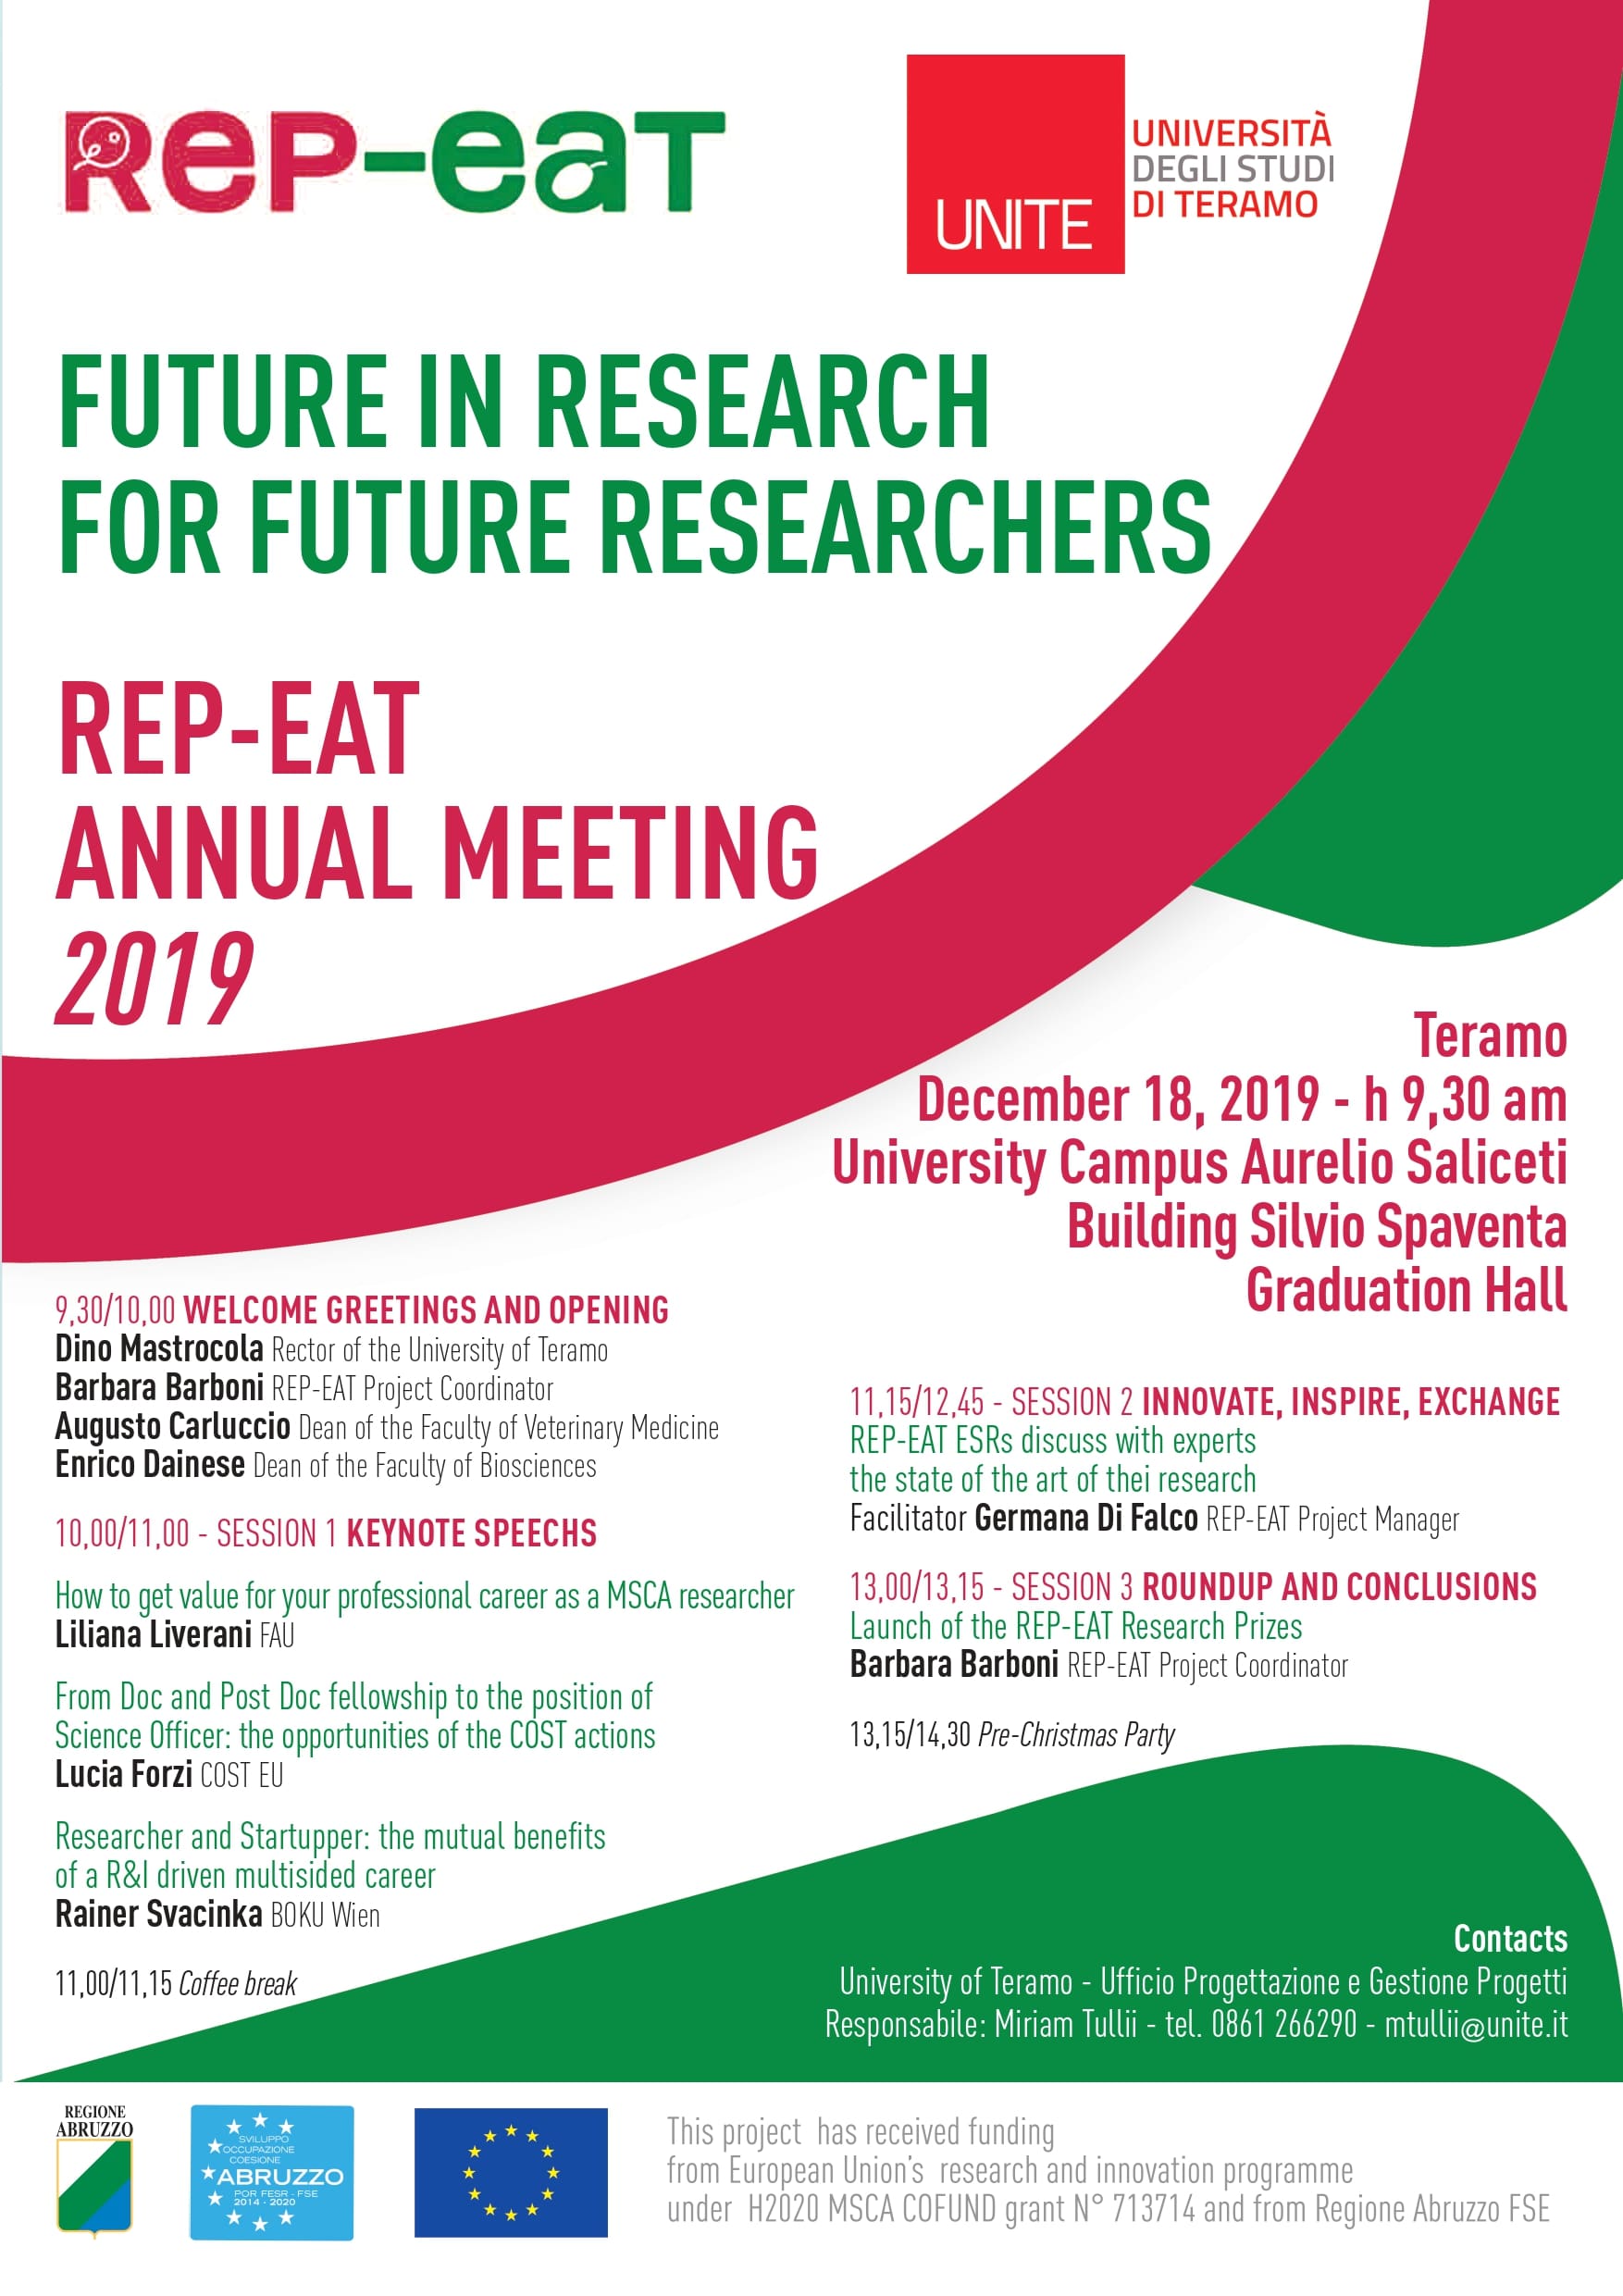 Rep-Eat Annual Meeting 2019 at UniTE: Future in Research For Future Researchers